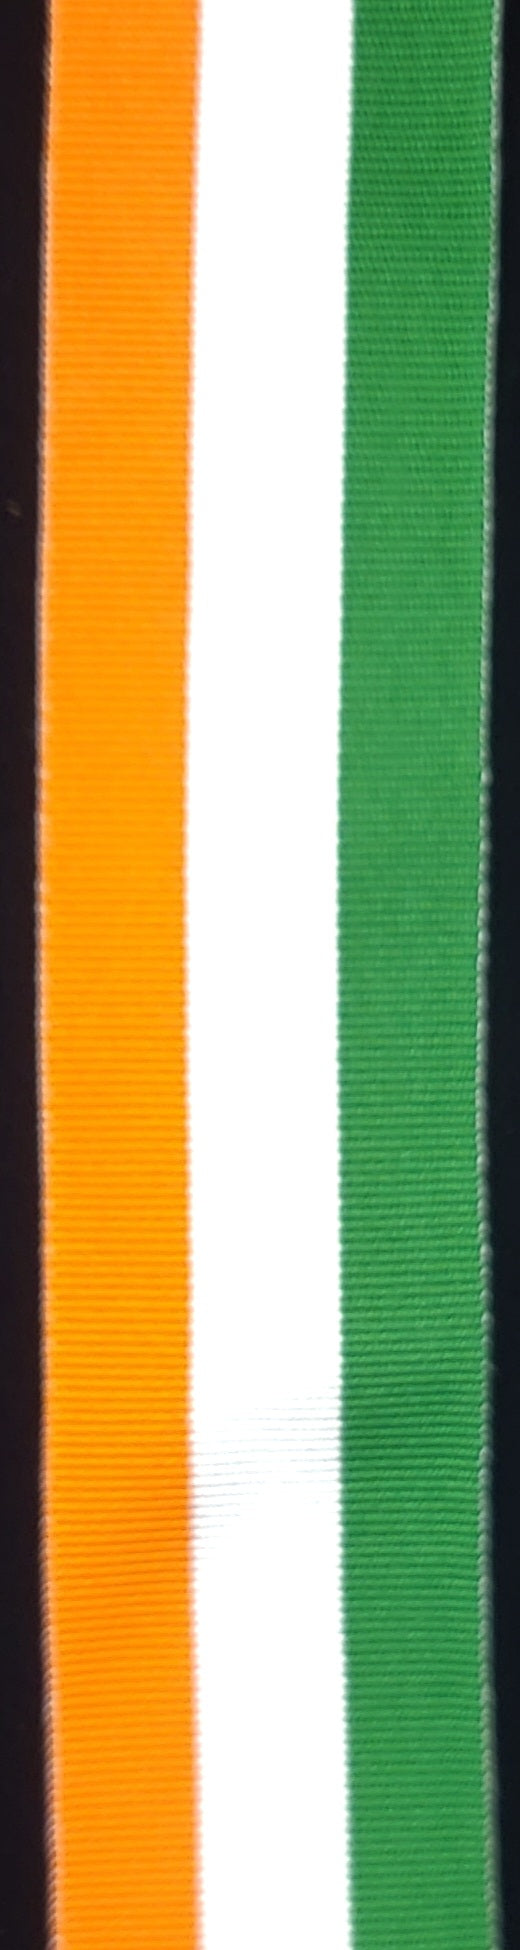 Ribbon, India Independence Medal